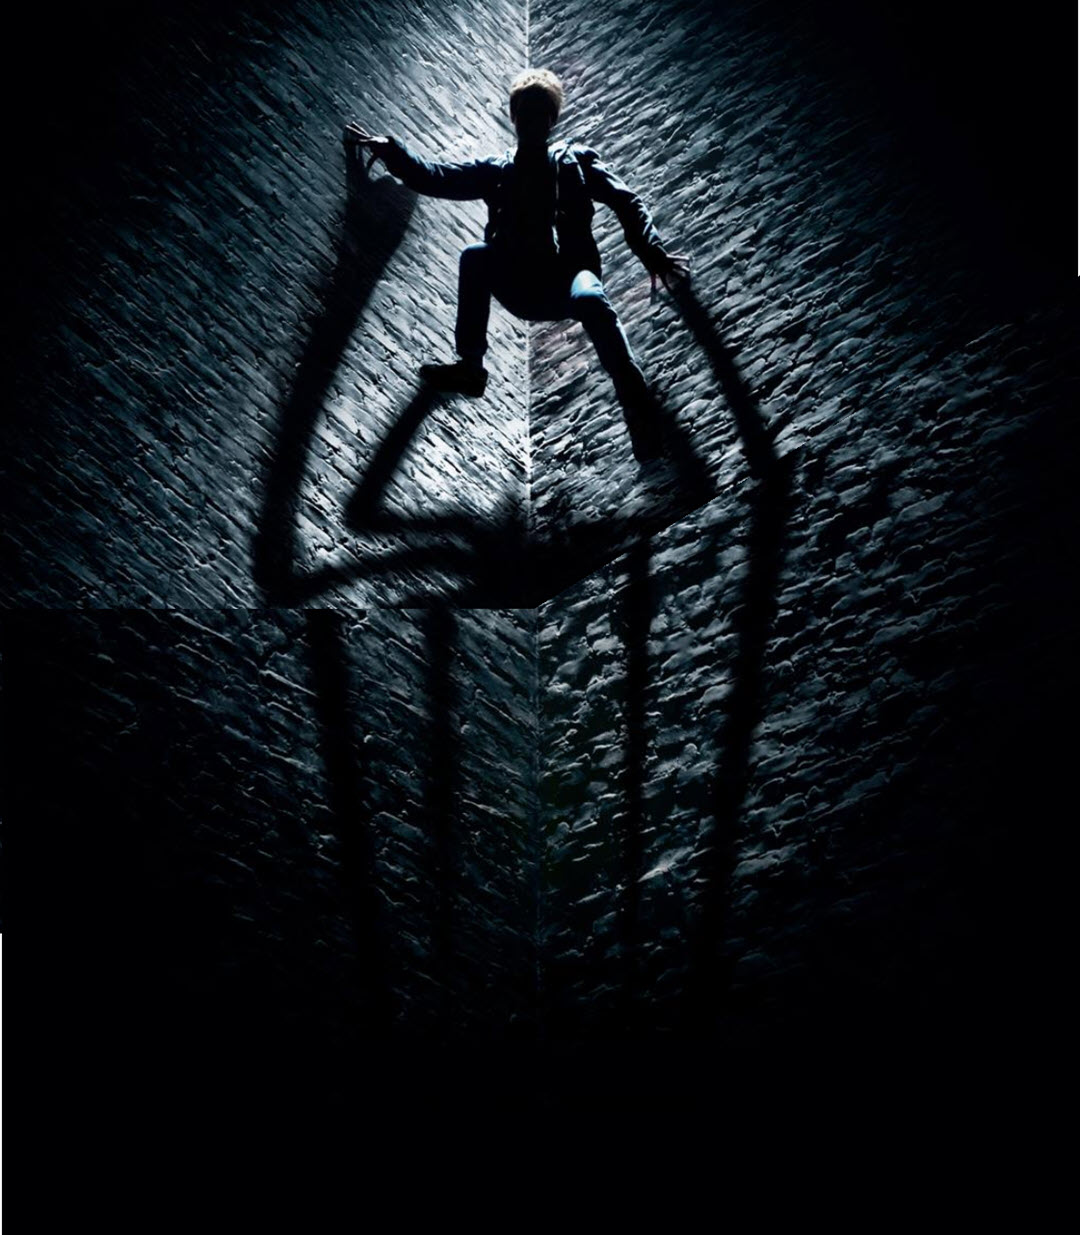 Spiderman Wallpaper For iPhone Candid Technology